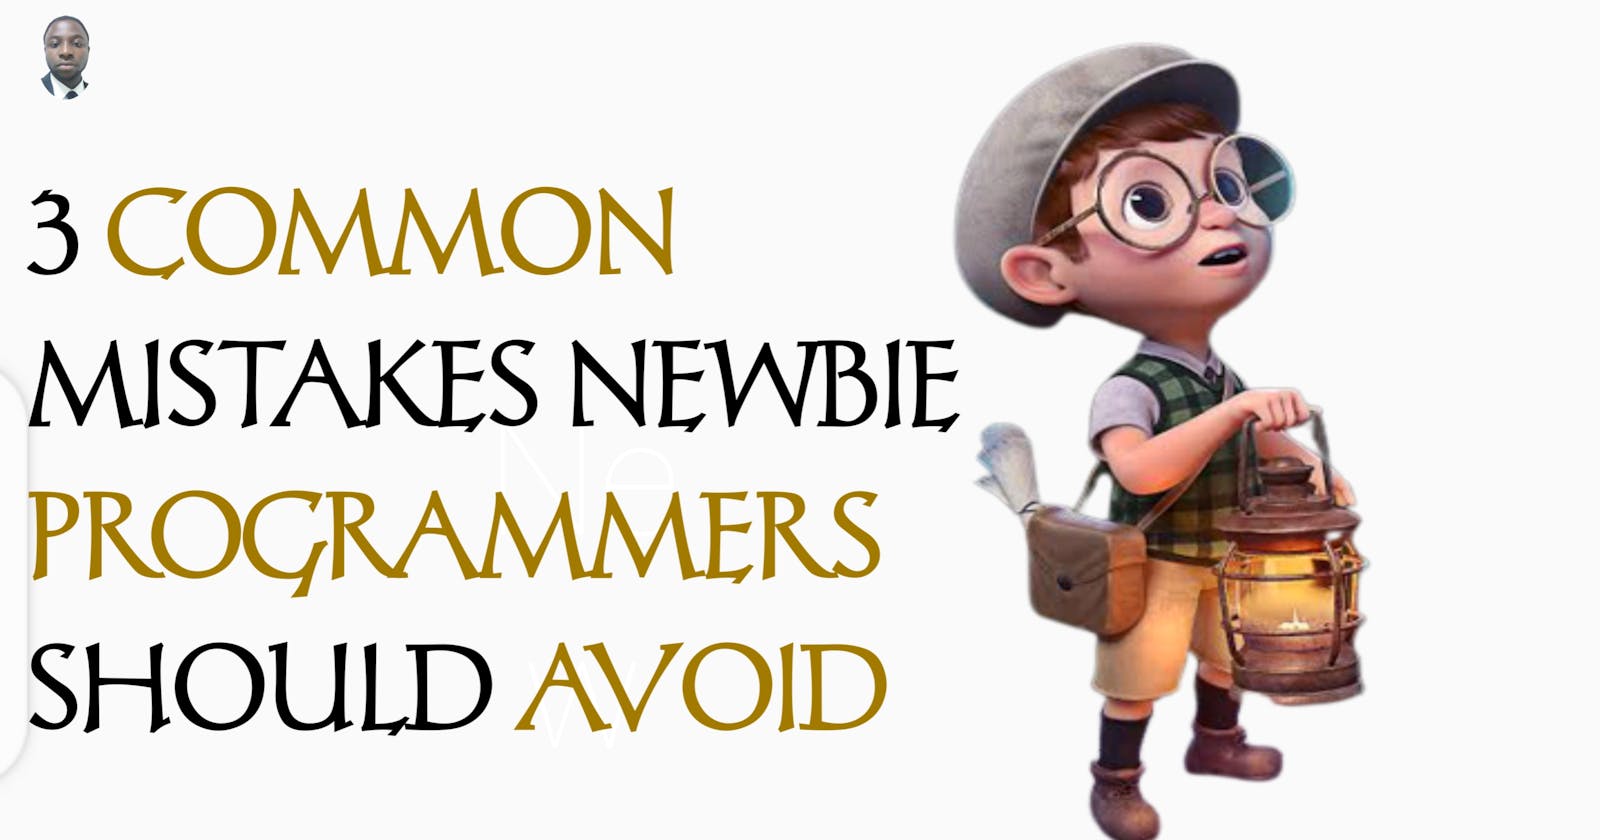 3 Common Mistakes Newbie Programmers Should Avoid.